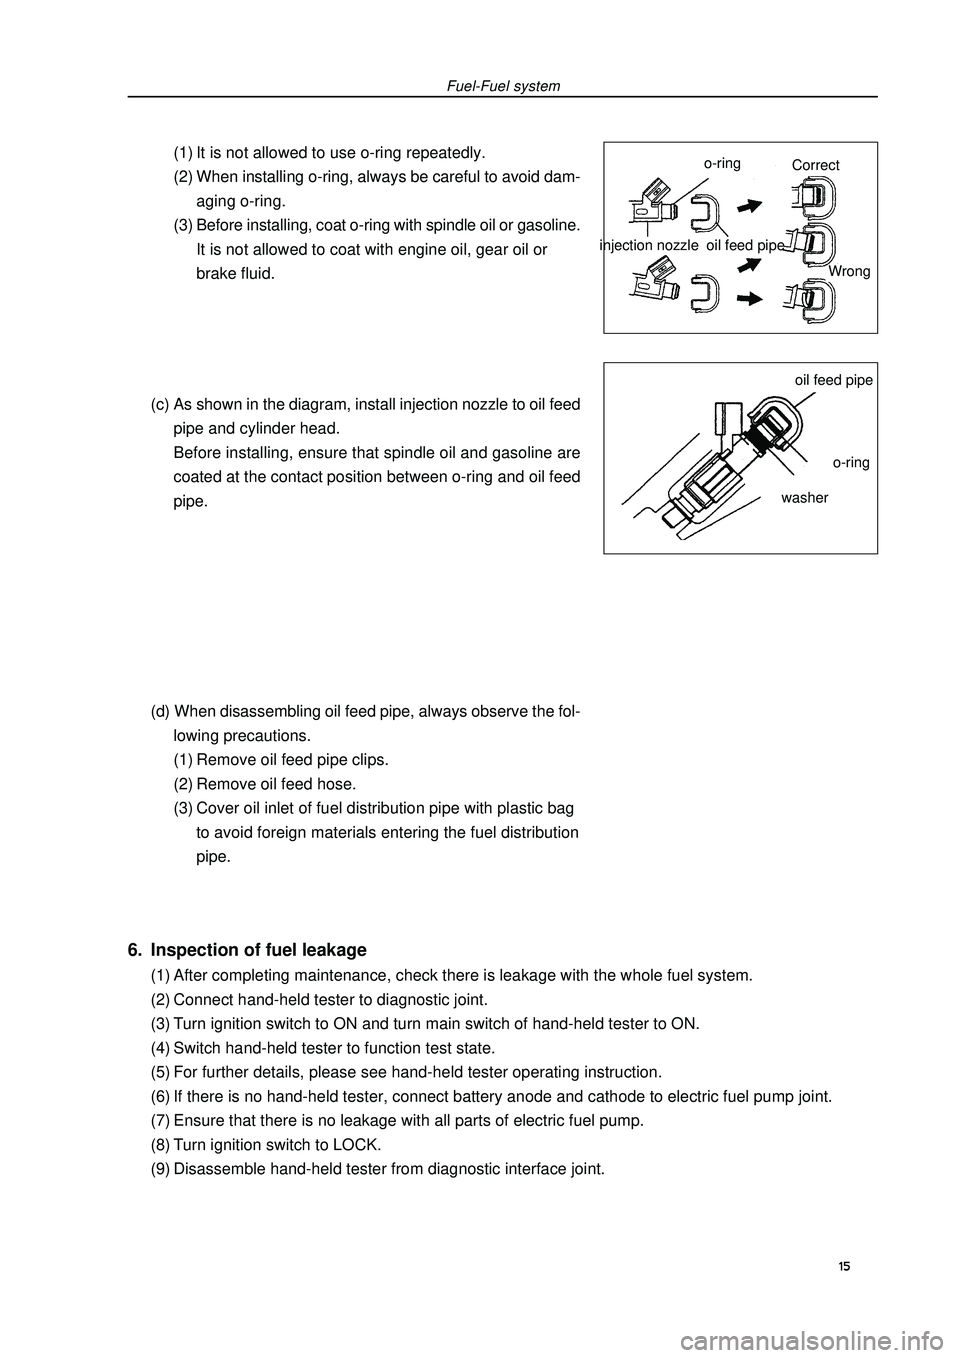 GEELY FC 2008  Workshop Manual Fuel-Fuel system(1) It is not allowed to use o-ring repeatedly.
(2) When installing o-ring, always be careful to avoid dam-
aging o-ring.
(3) Before installing, coat o-ring with spindle oil or gasolin